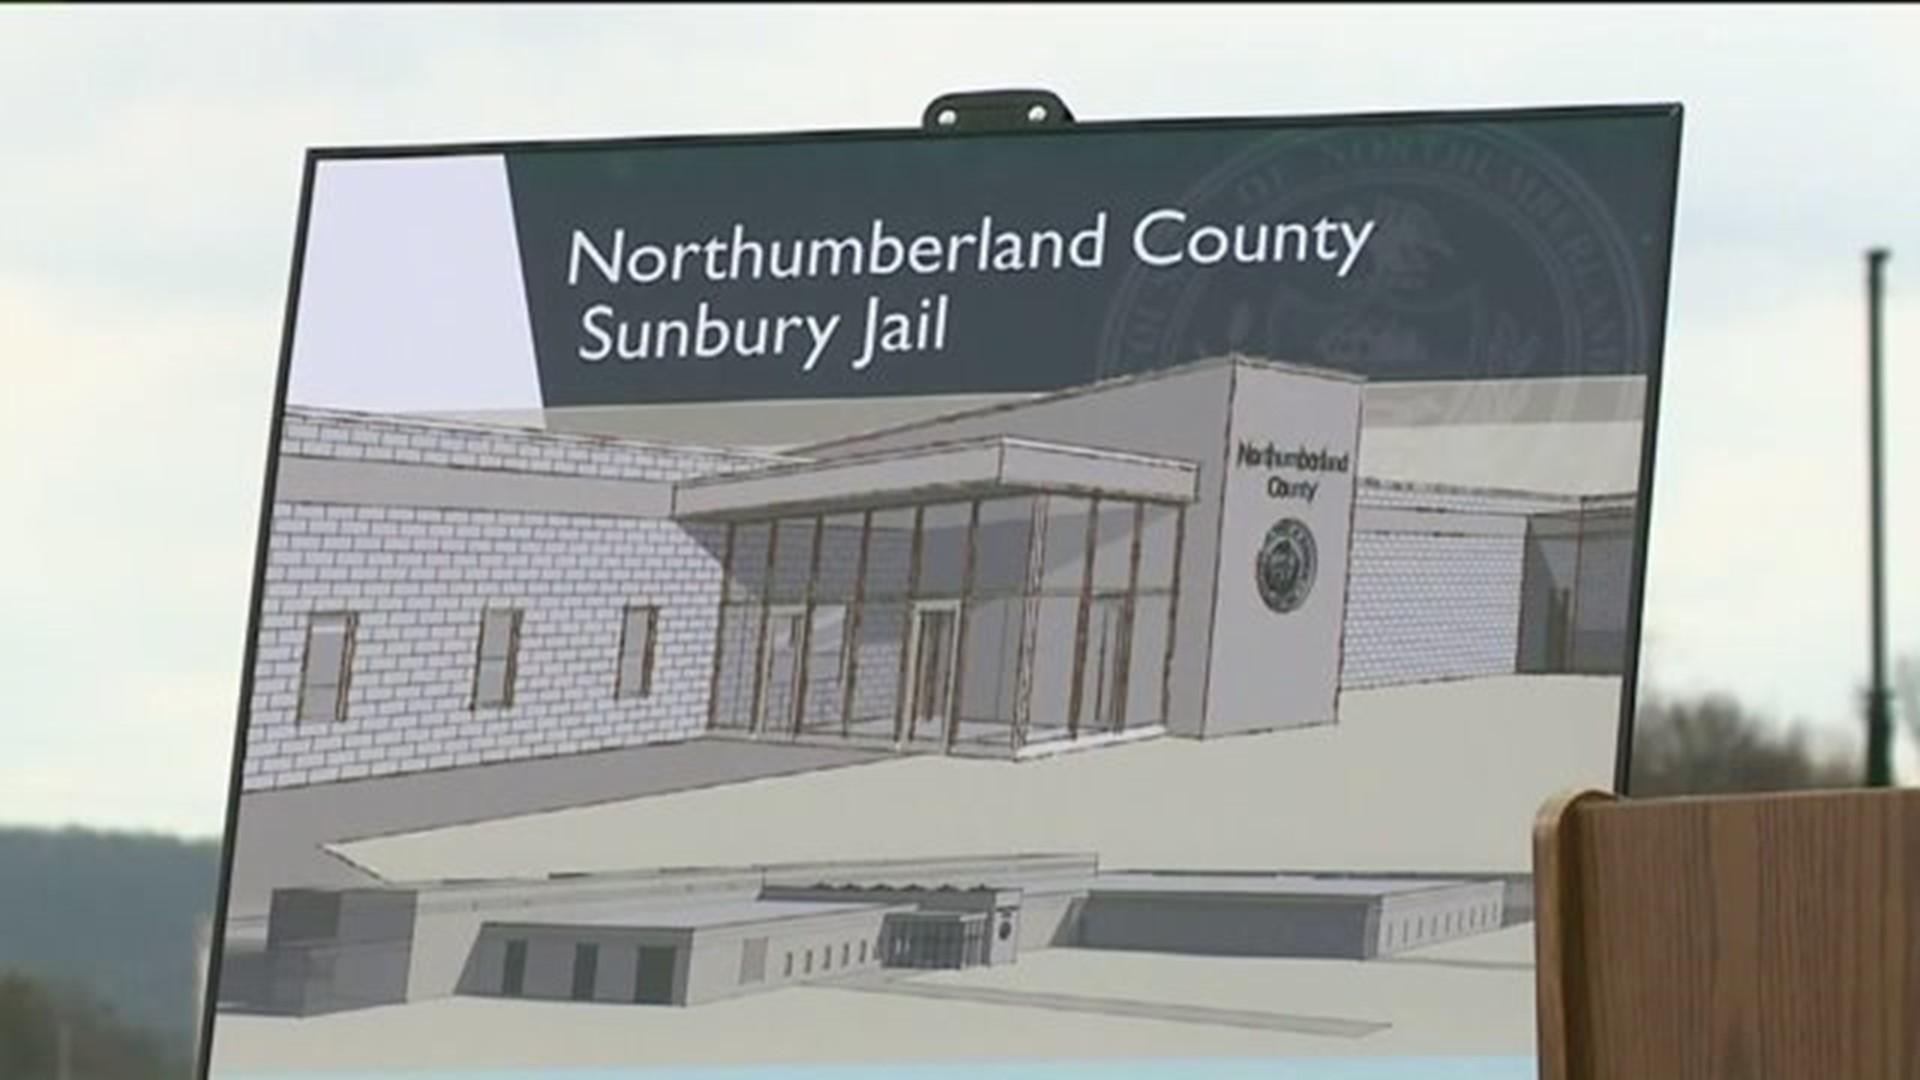 Ground Broken for New Northumberland County Prison